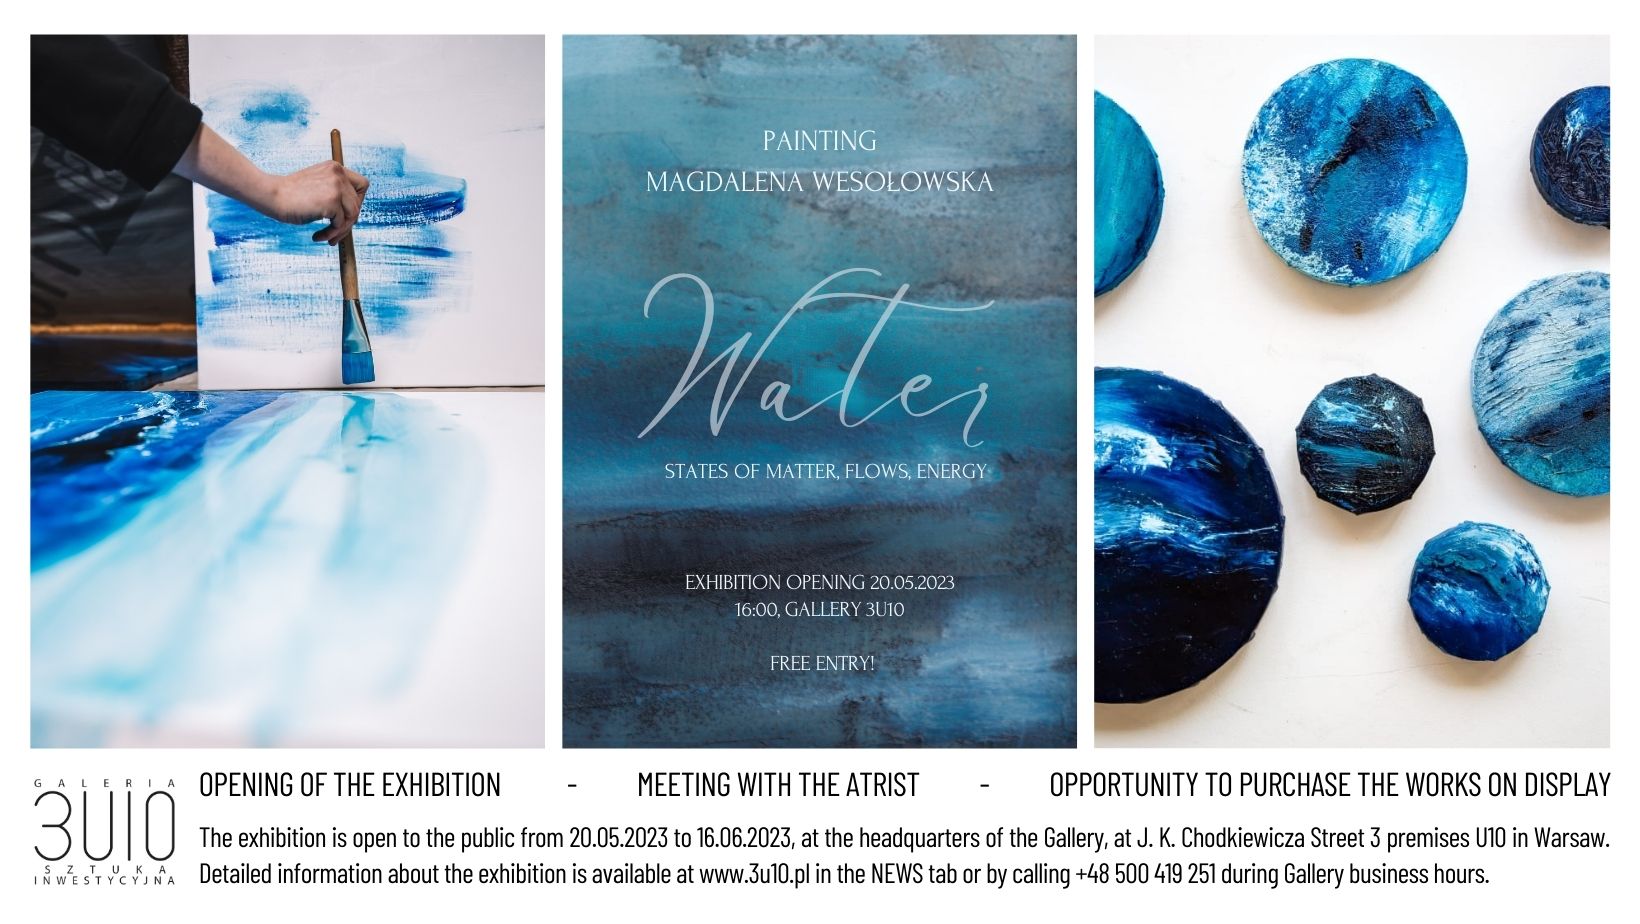 “WATER – STATES OF AGGREGATION, FLOWS, ENERGY”. – MAGDALENA WESOŁOWSKA, PAINTING EXHIBITION AT GALLERY 3U10